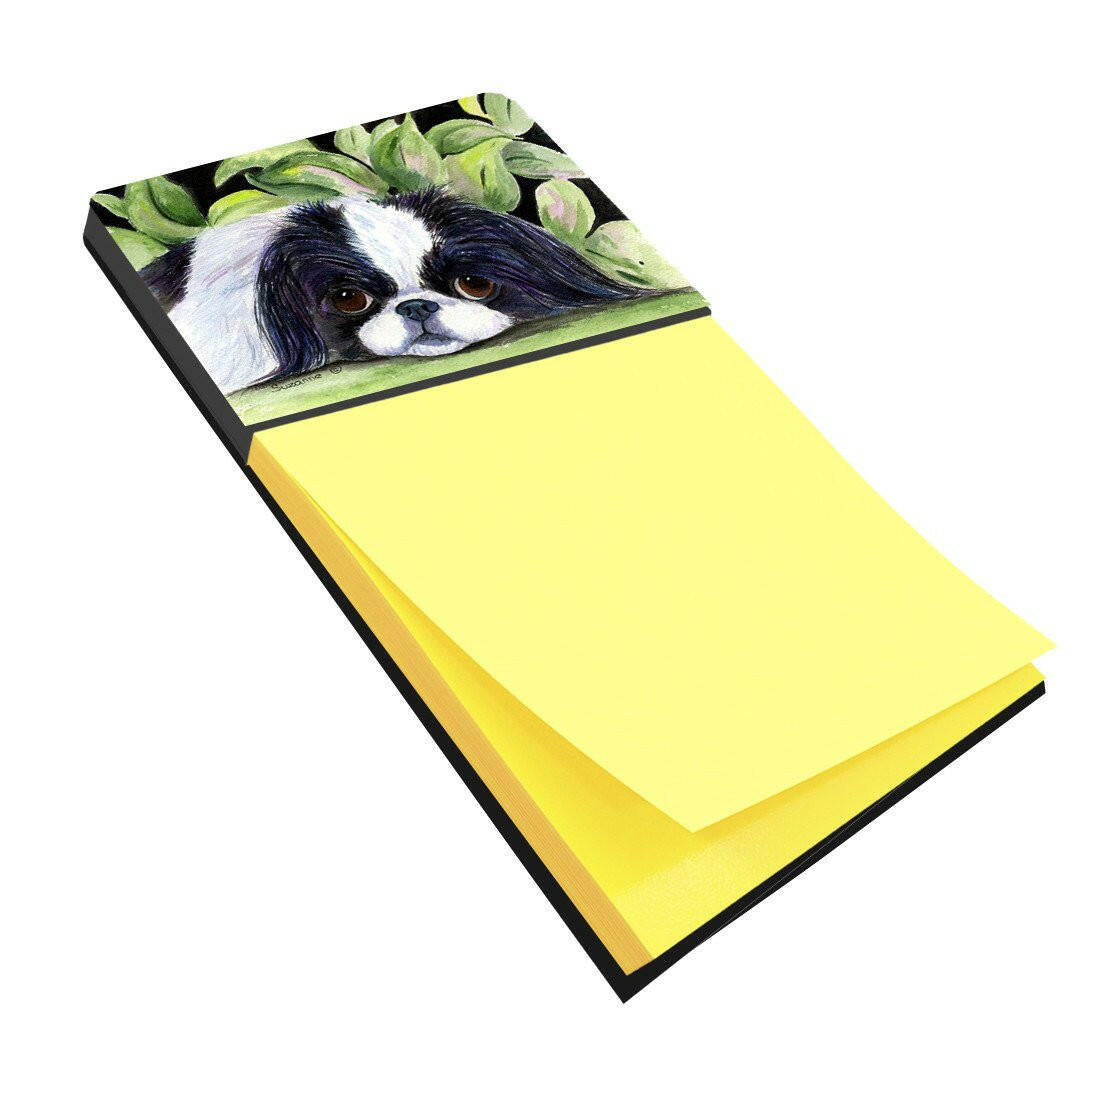 Japanese Chin Refiillable Sticky Note Holder or Postit Note Dispenser SS8322SN by Caroline's Treasures